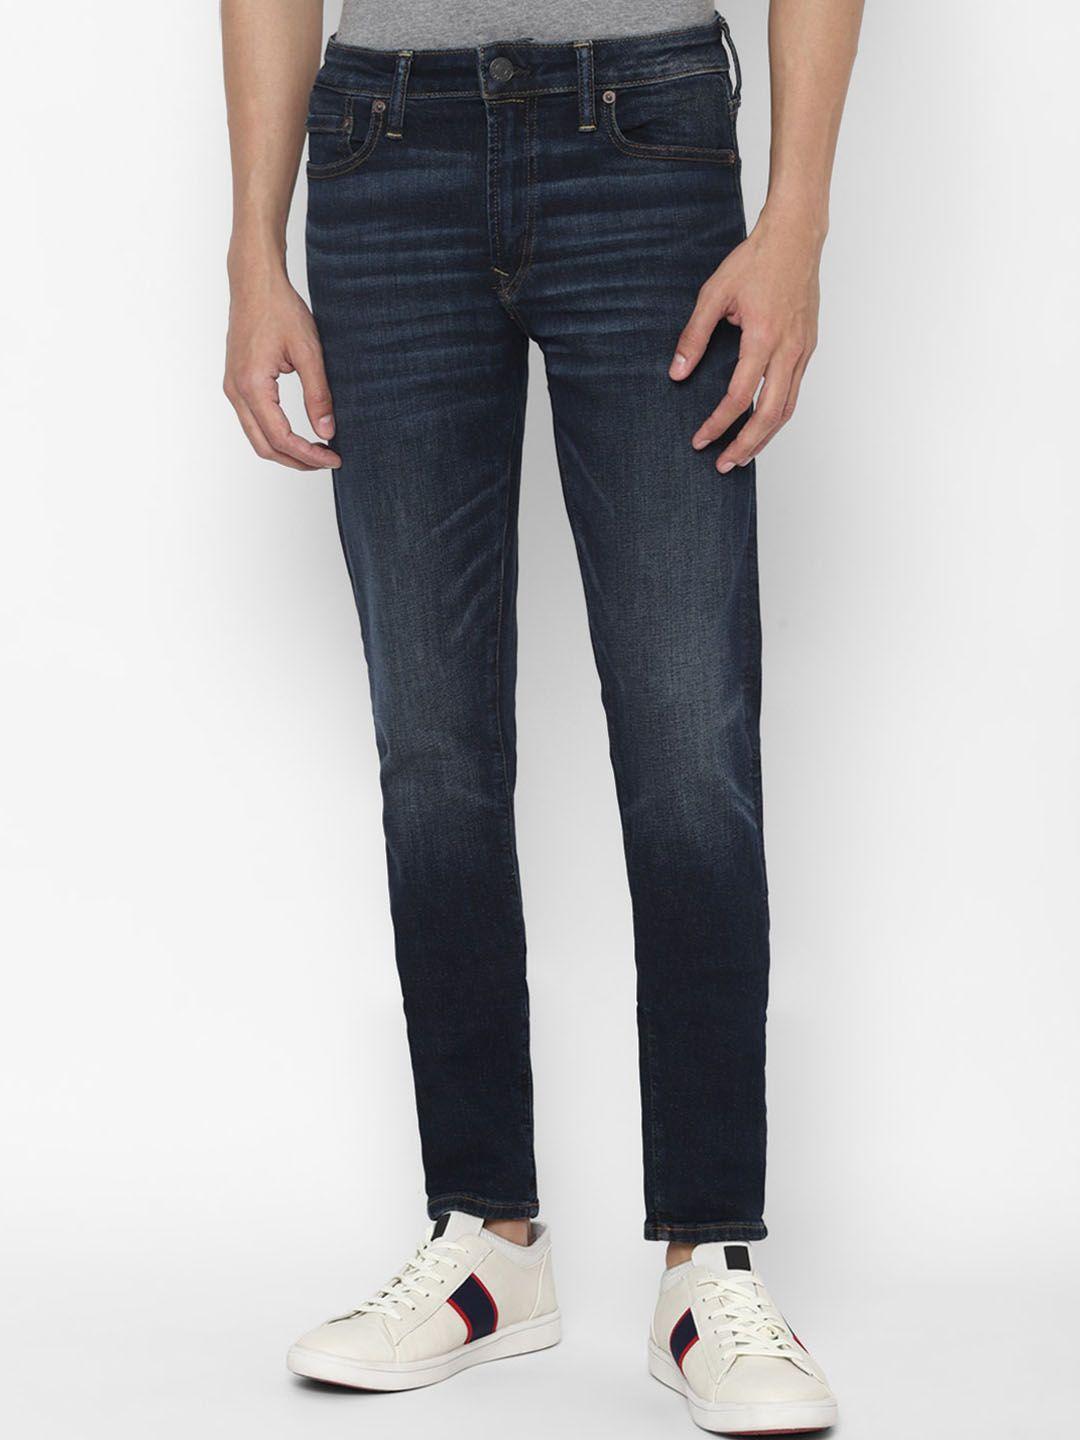 american-eagle-outfitters-men-blue-skinny-fit-light-fade-jeans